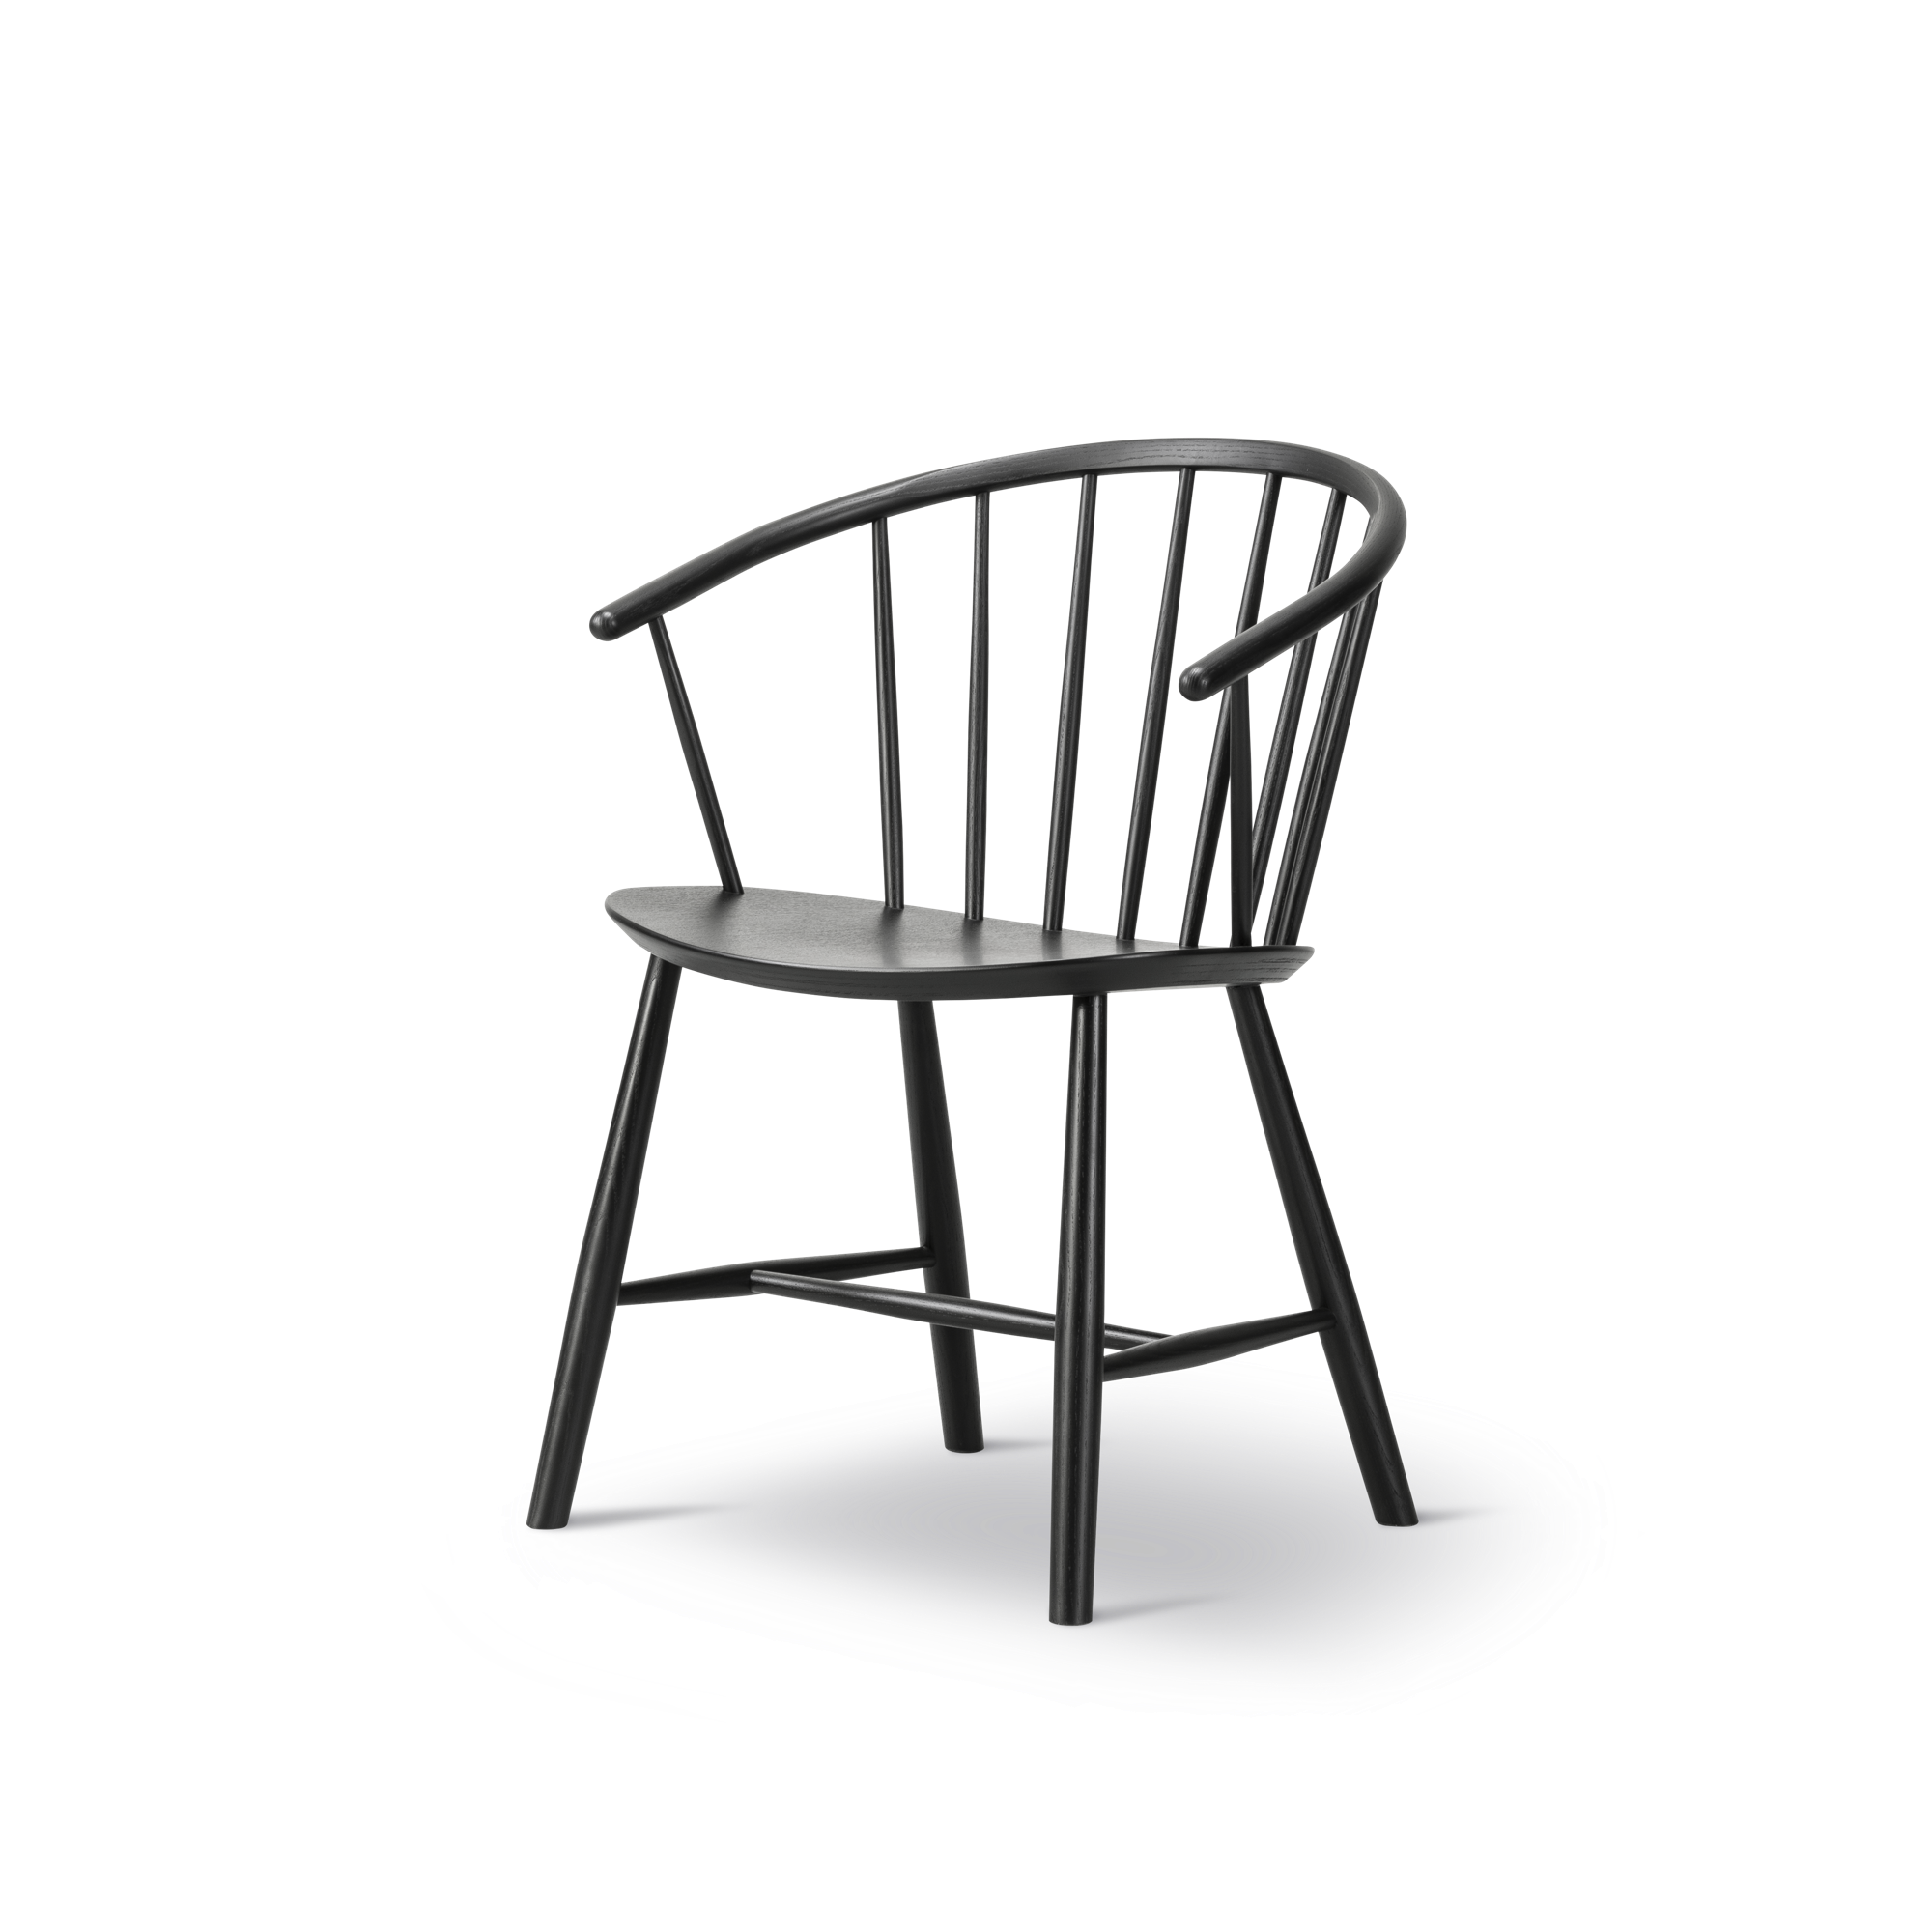 Fredericia Furniture Johansson J64 Dining Chair Black Lacquered Ash